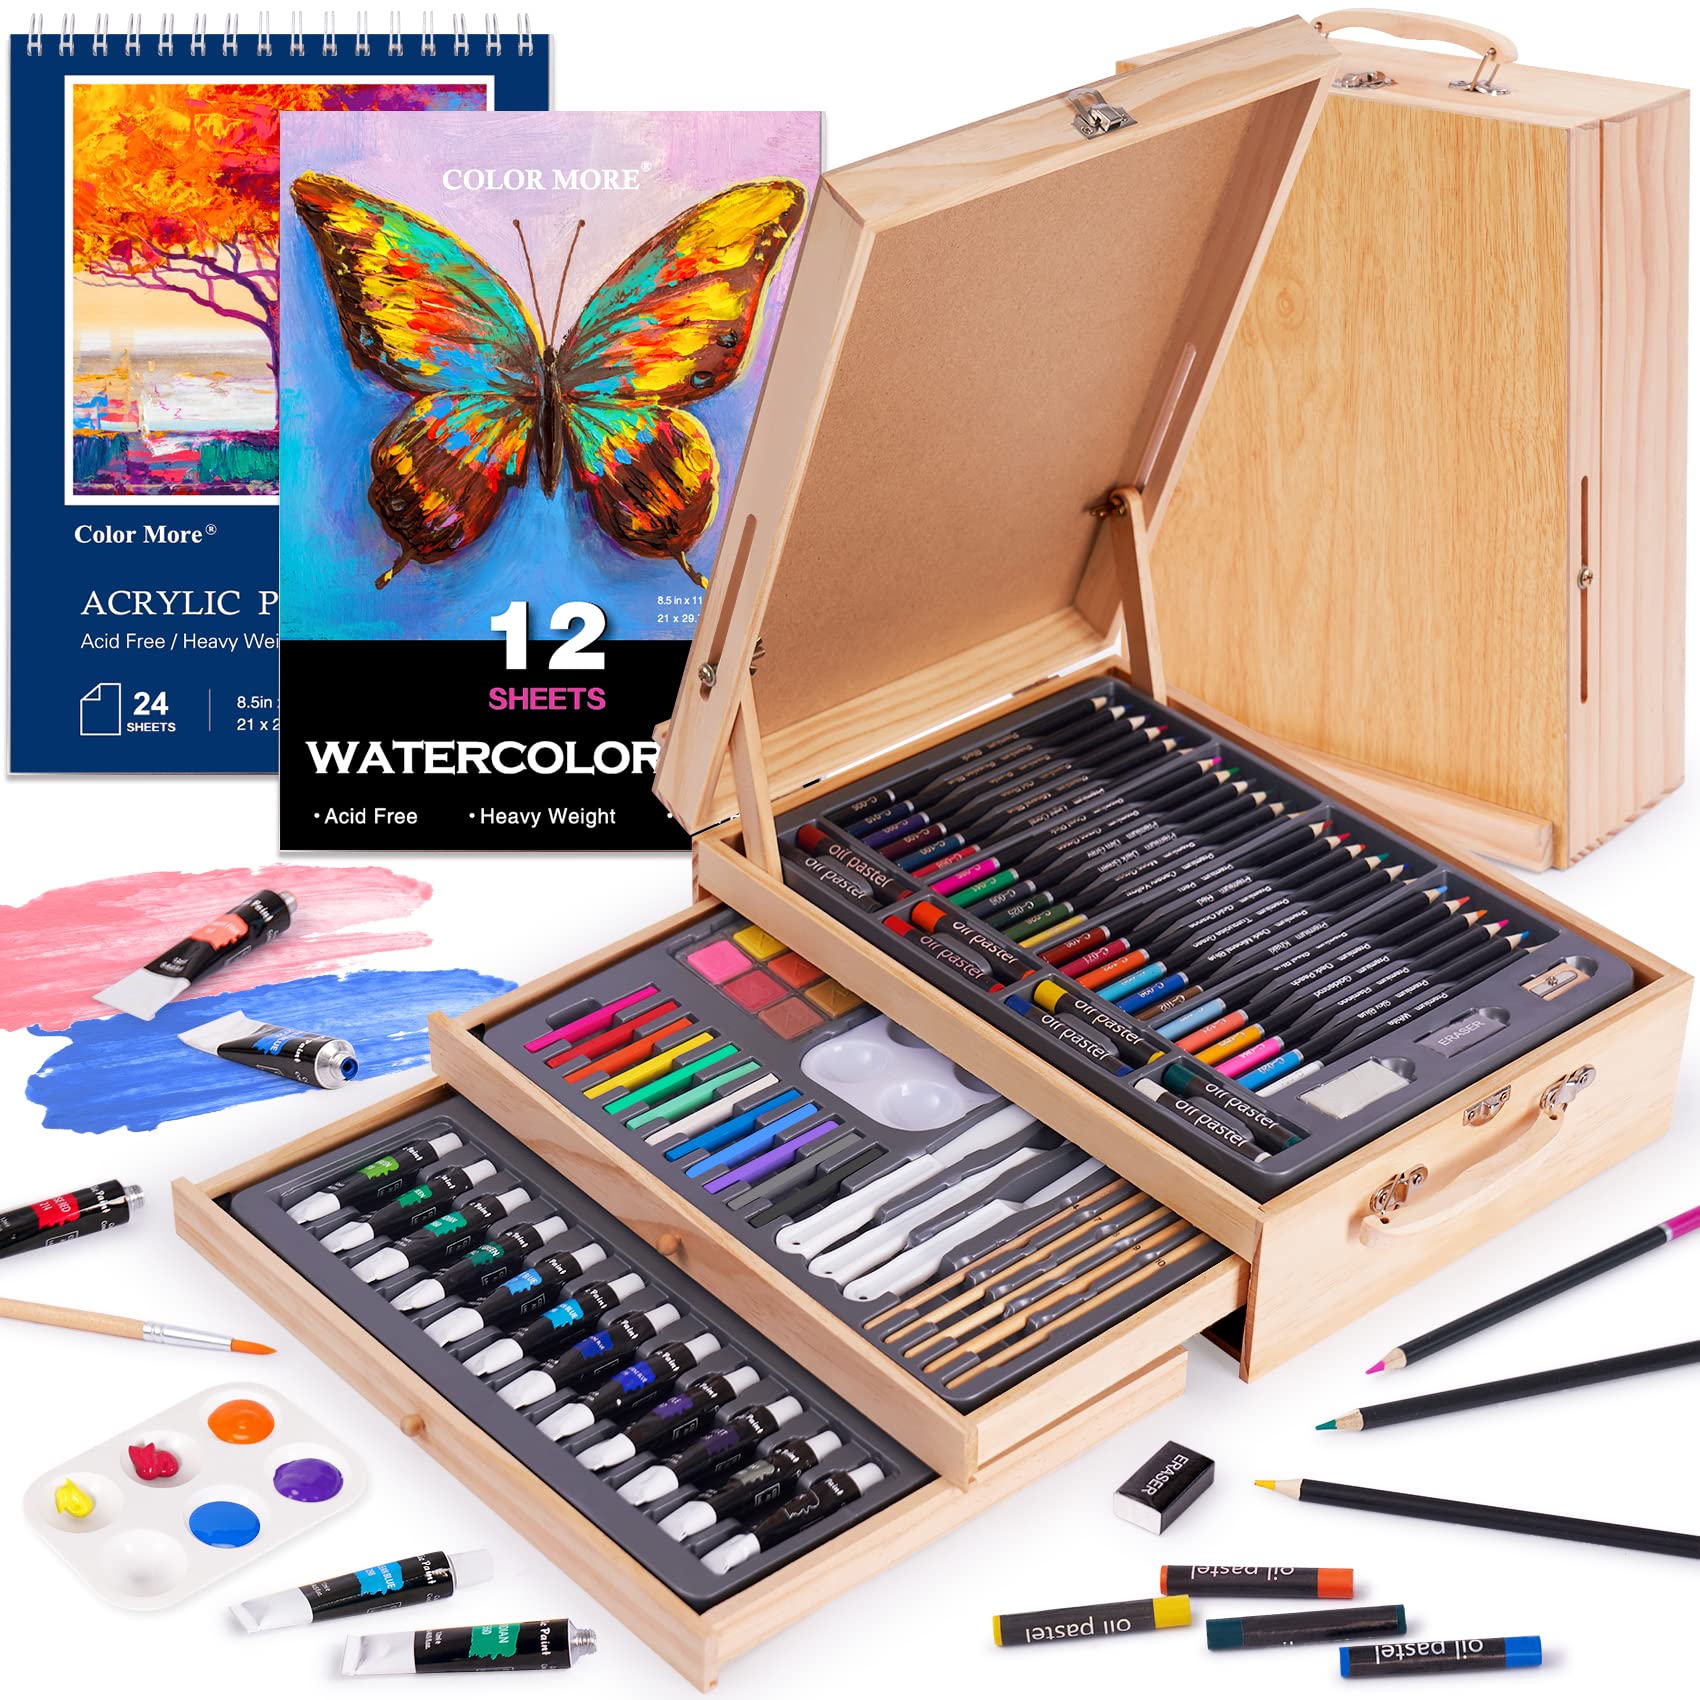 Paint Set,95 Piece Deluxe Wooden Art Set Crafts Drawing Painting Kit with Easel and 2 Drawing Pads, Creative Gift Box for Teens Adults Artist Beginners,Art Kit,Art Supplies